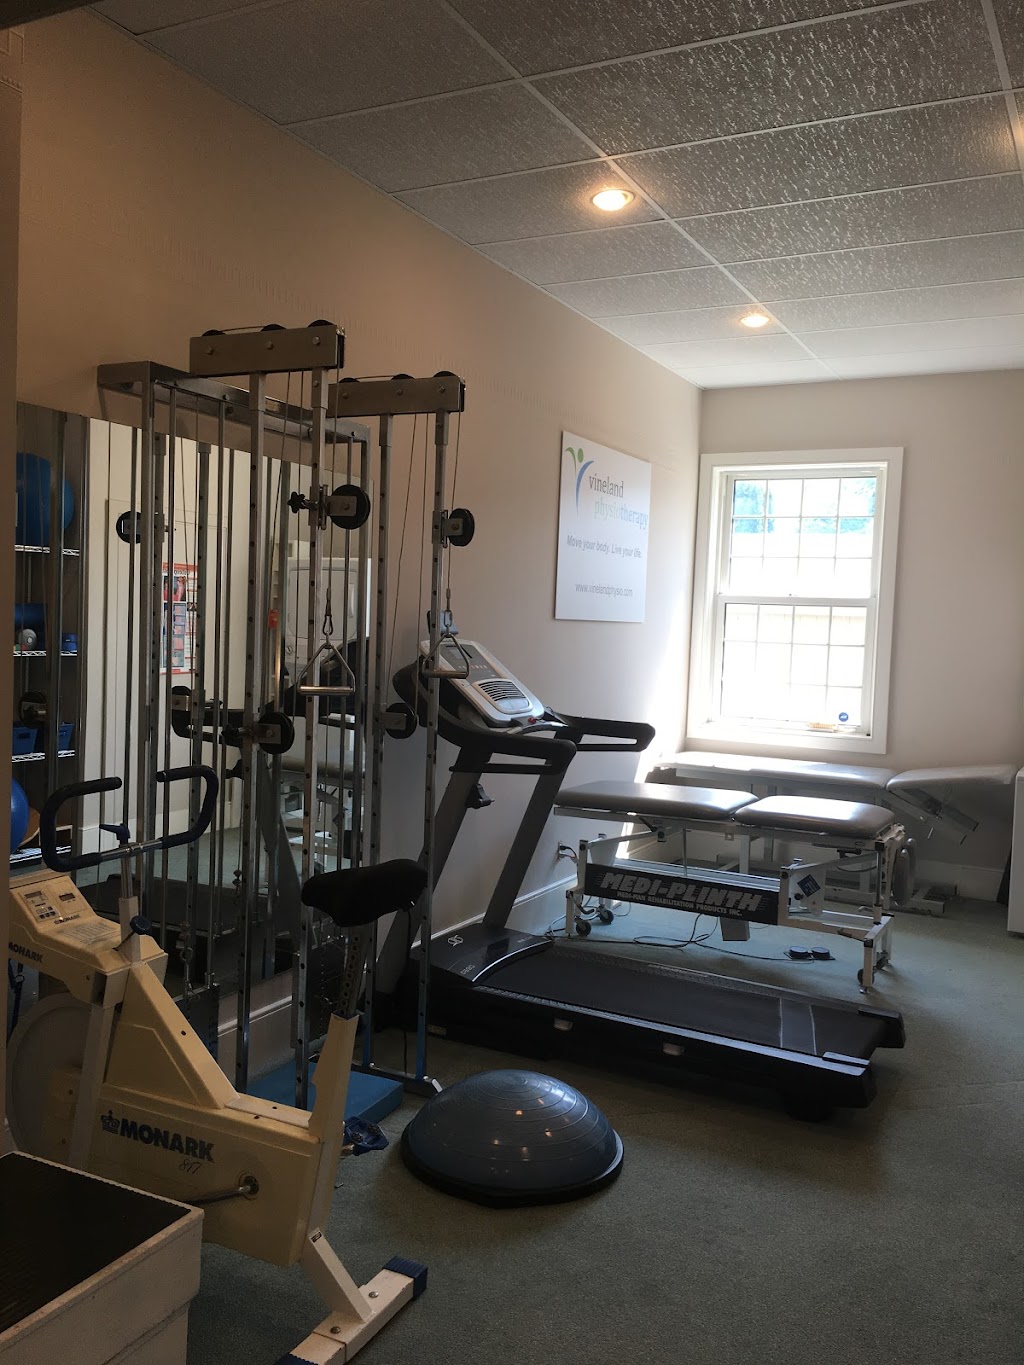 Vineland Physiotherapy | 4100 Victoria Ave Suite 101, Vineland, ON L0R 2C0, Canada | Phone: (905) 562-3511